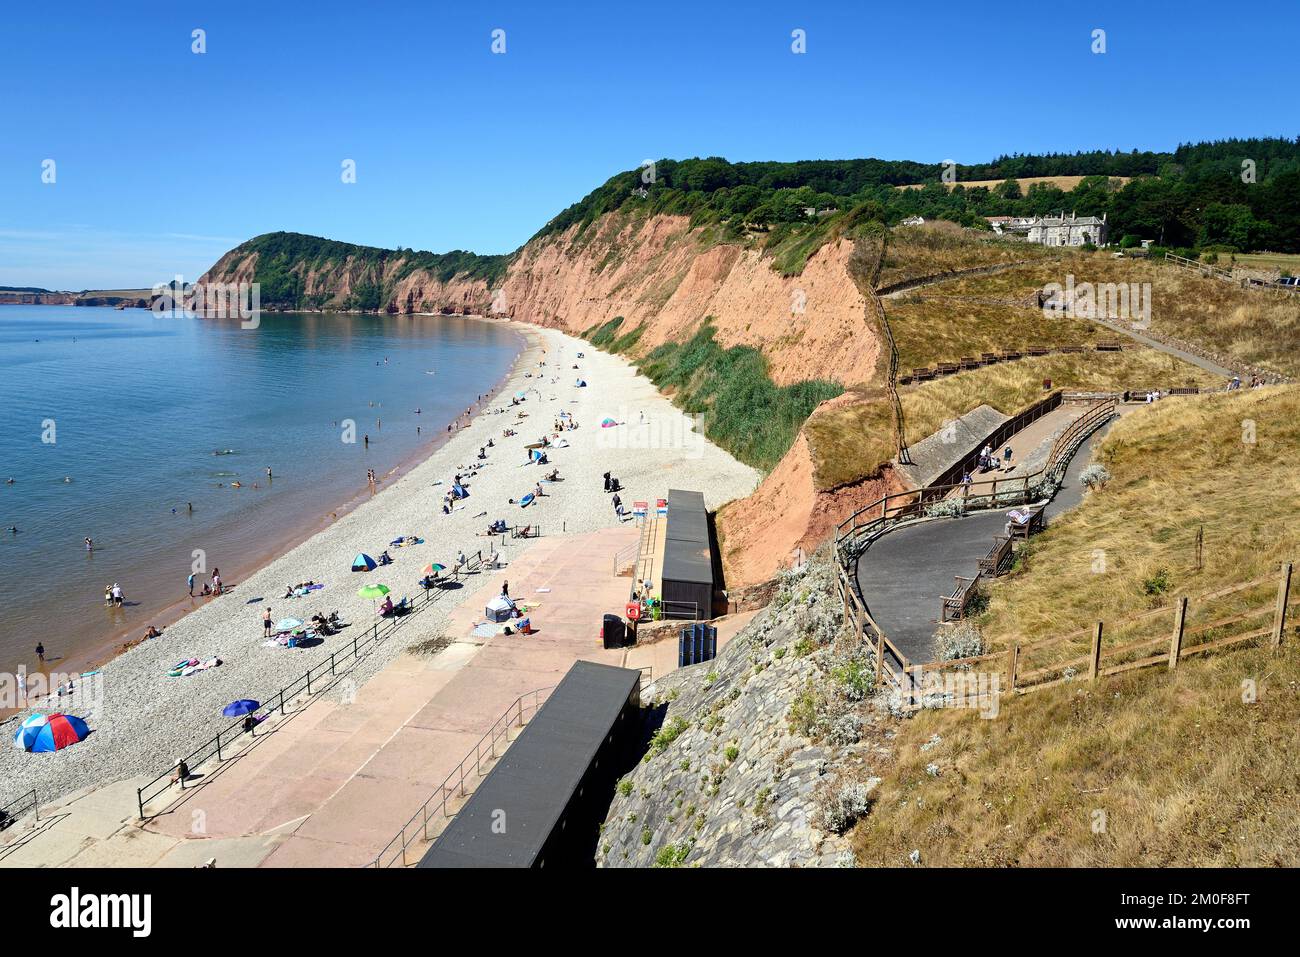 Elevated view of tourists relaxing on Jacobs Ladder beach with cliffs and coastline to the rear, Sidmouth, Devon, UK, Europe. Stock Photo